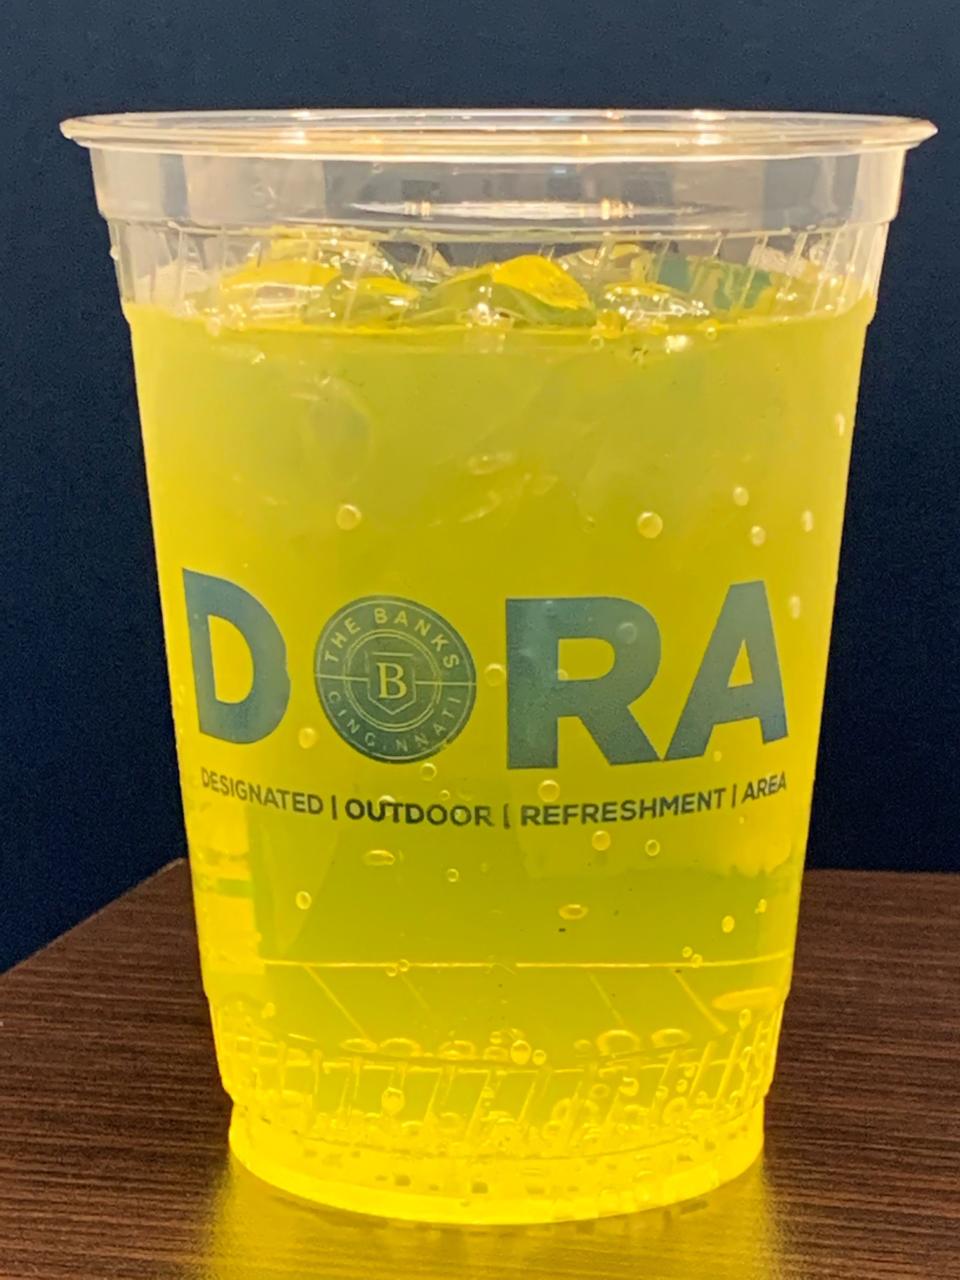 For almost all designated outdoor refreshment areas, you have to drink from a designated cup.